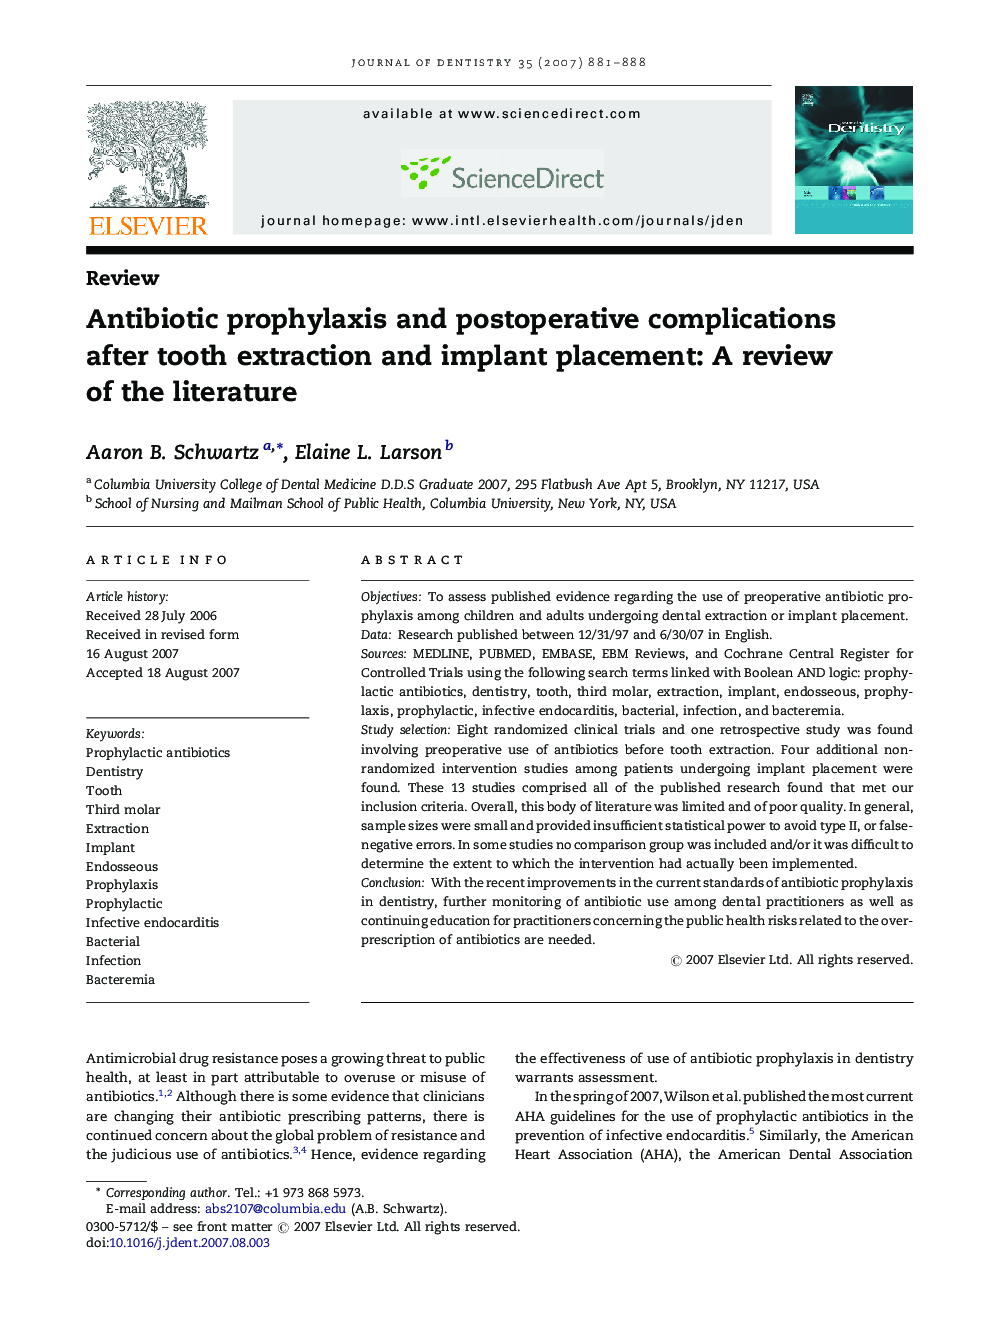 Antibiotic prophylaxis and postoperative complications after tooth extraction and implant placement: A review of the literature